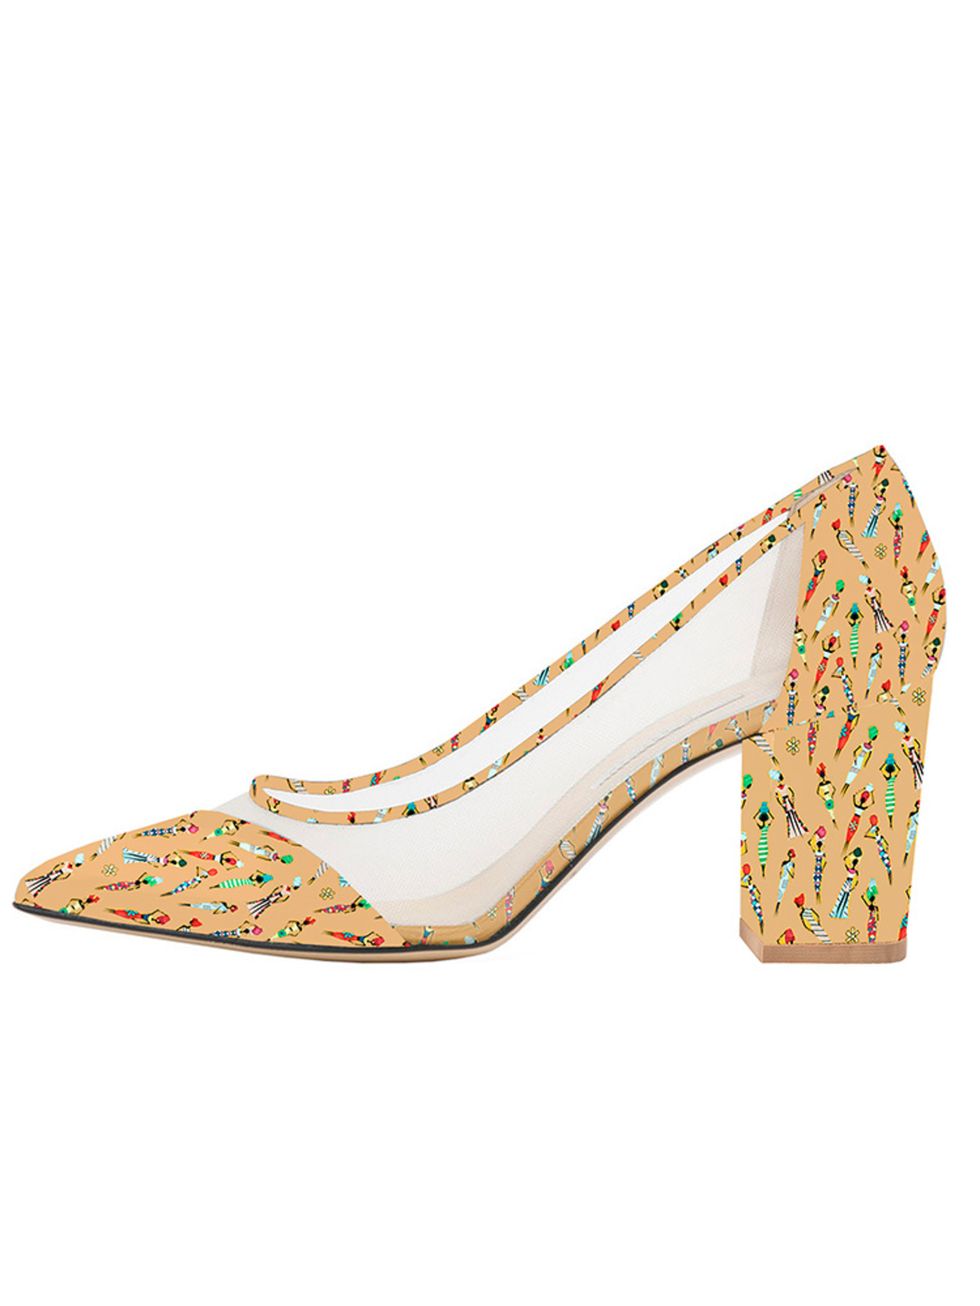 <p>Bionda Castana for M2M <a href="http://biondacastana.com/collections/shoes/products/juliet-mothers2mothers-africa-art-deco-single-sole-mid-heel-75mm-heel" target="_blank">'Juliet' shoes</a>, £395</p>